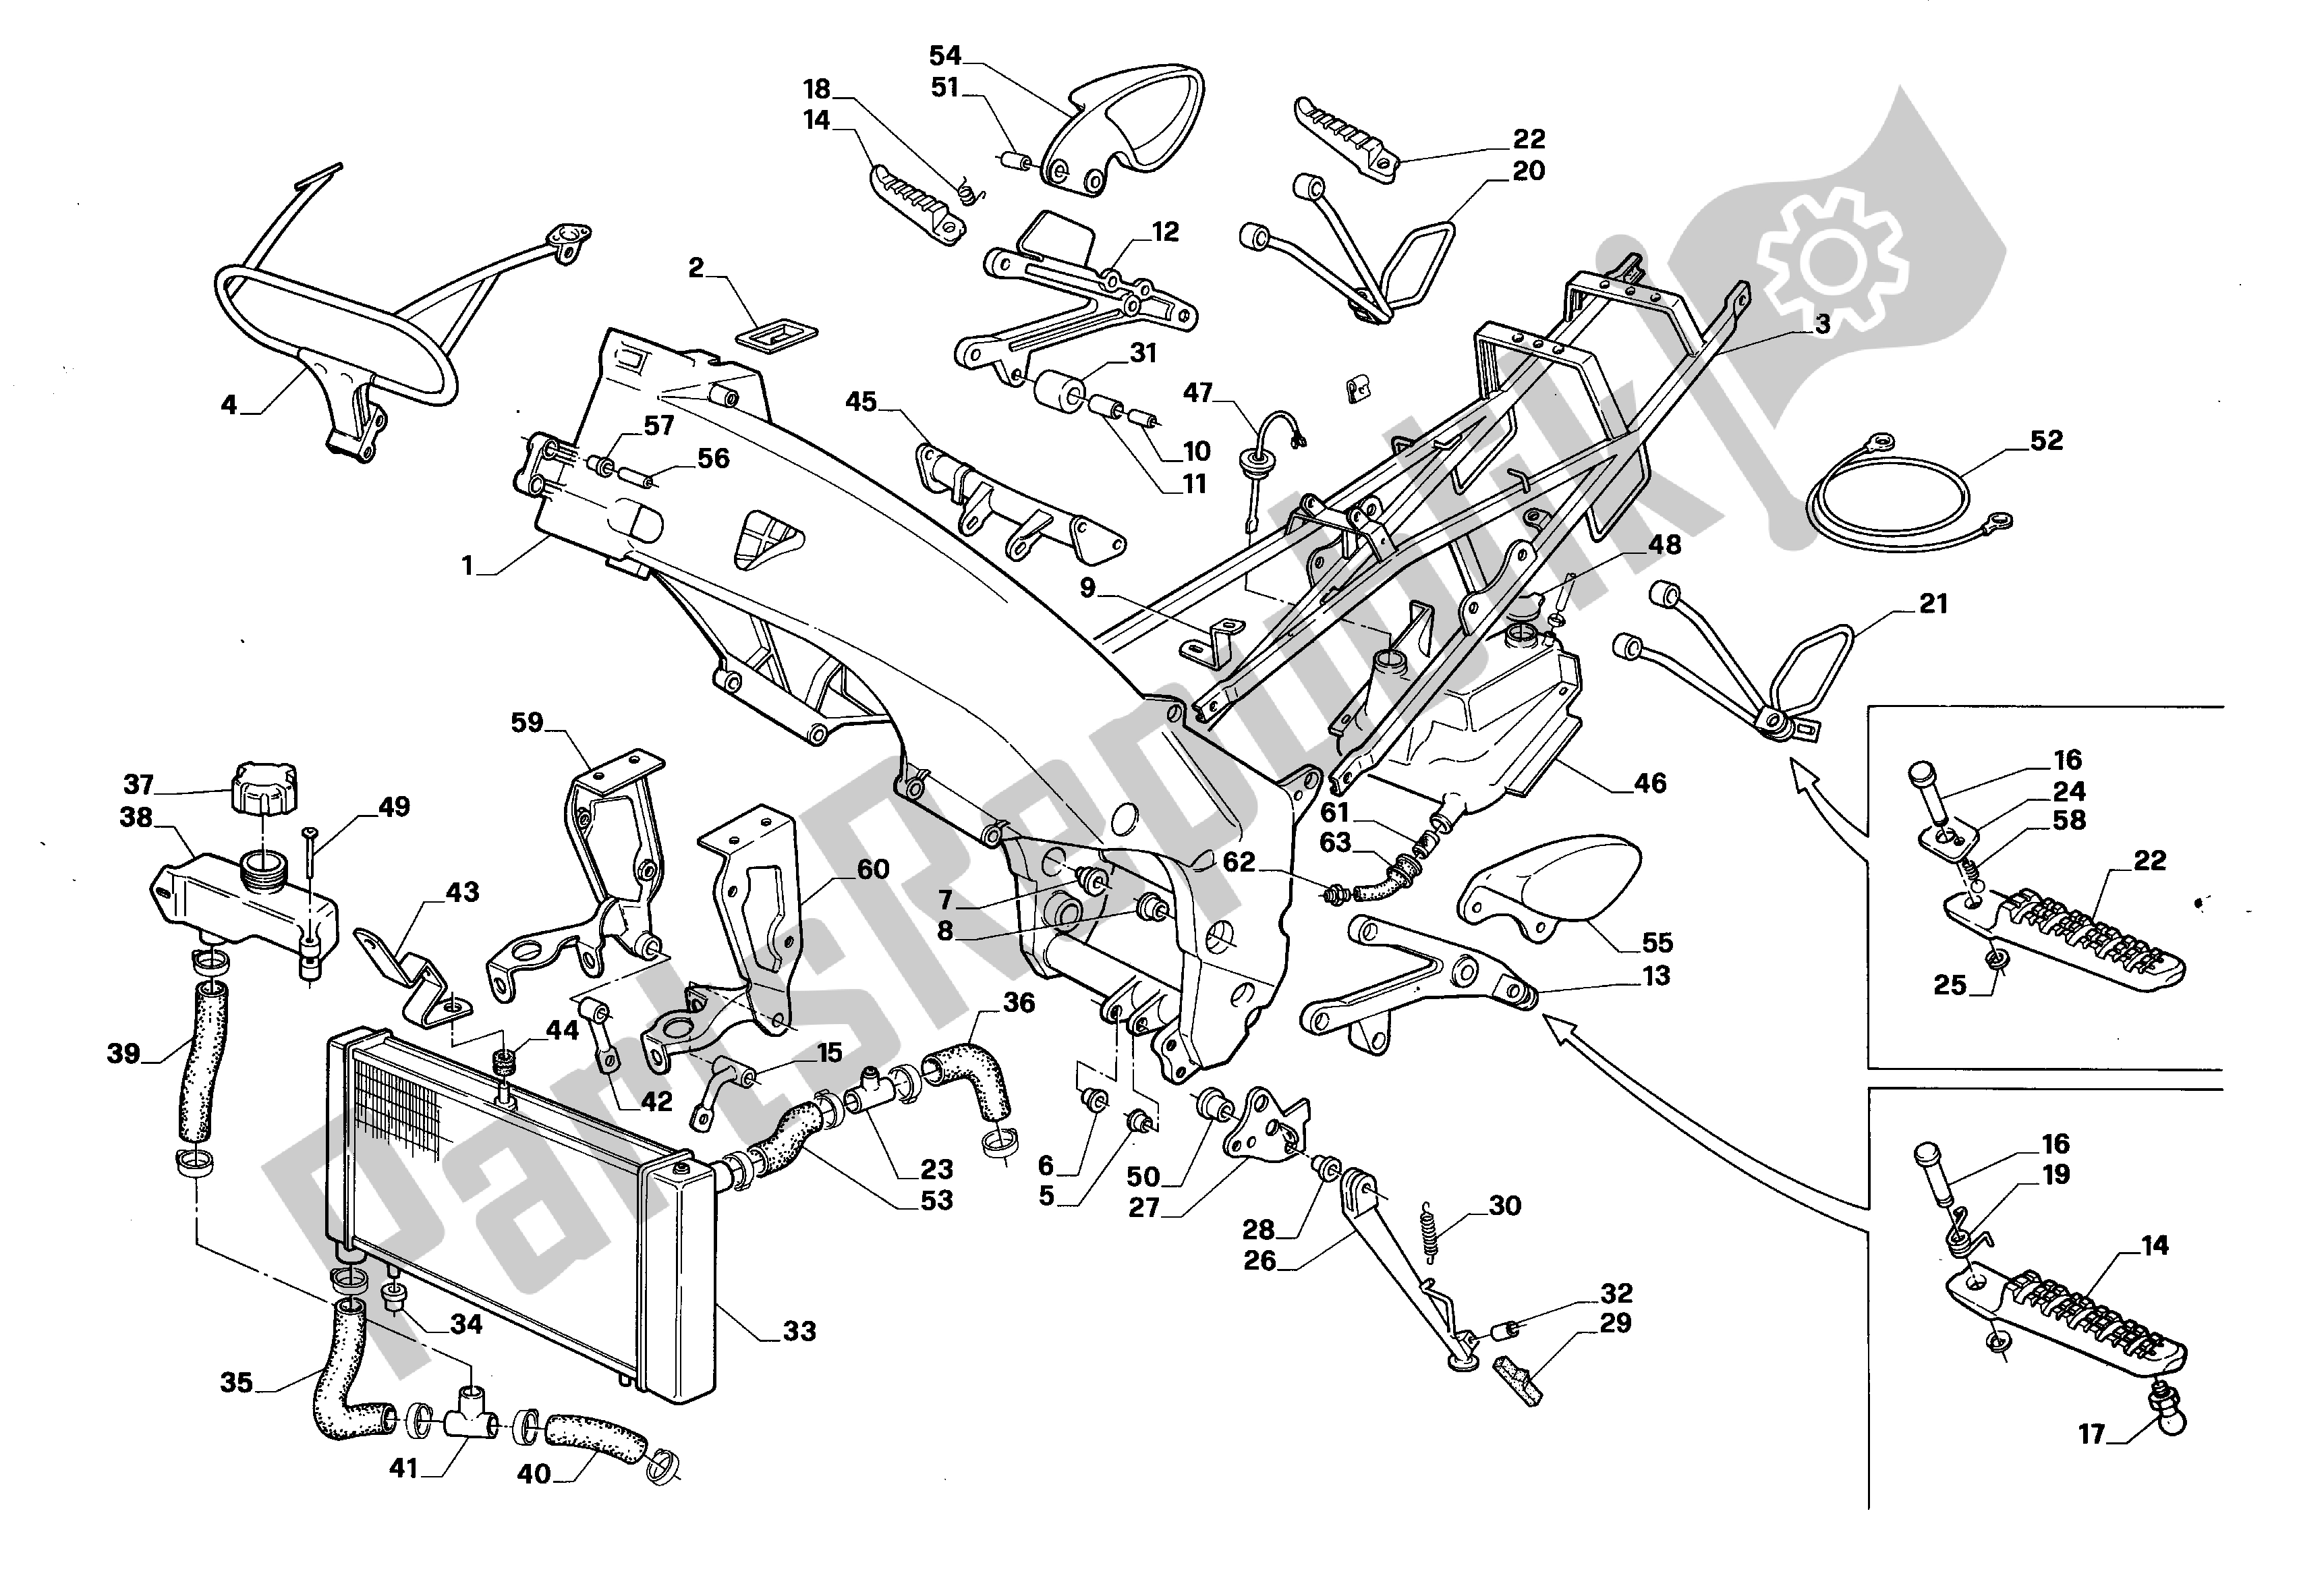 All parts for the Frame of the Aprilia RS 125 1992 - 1994